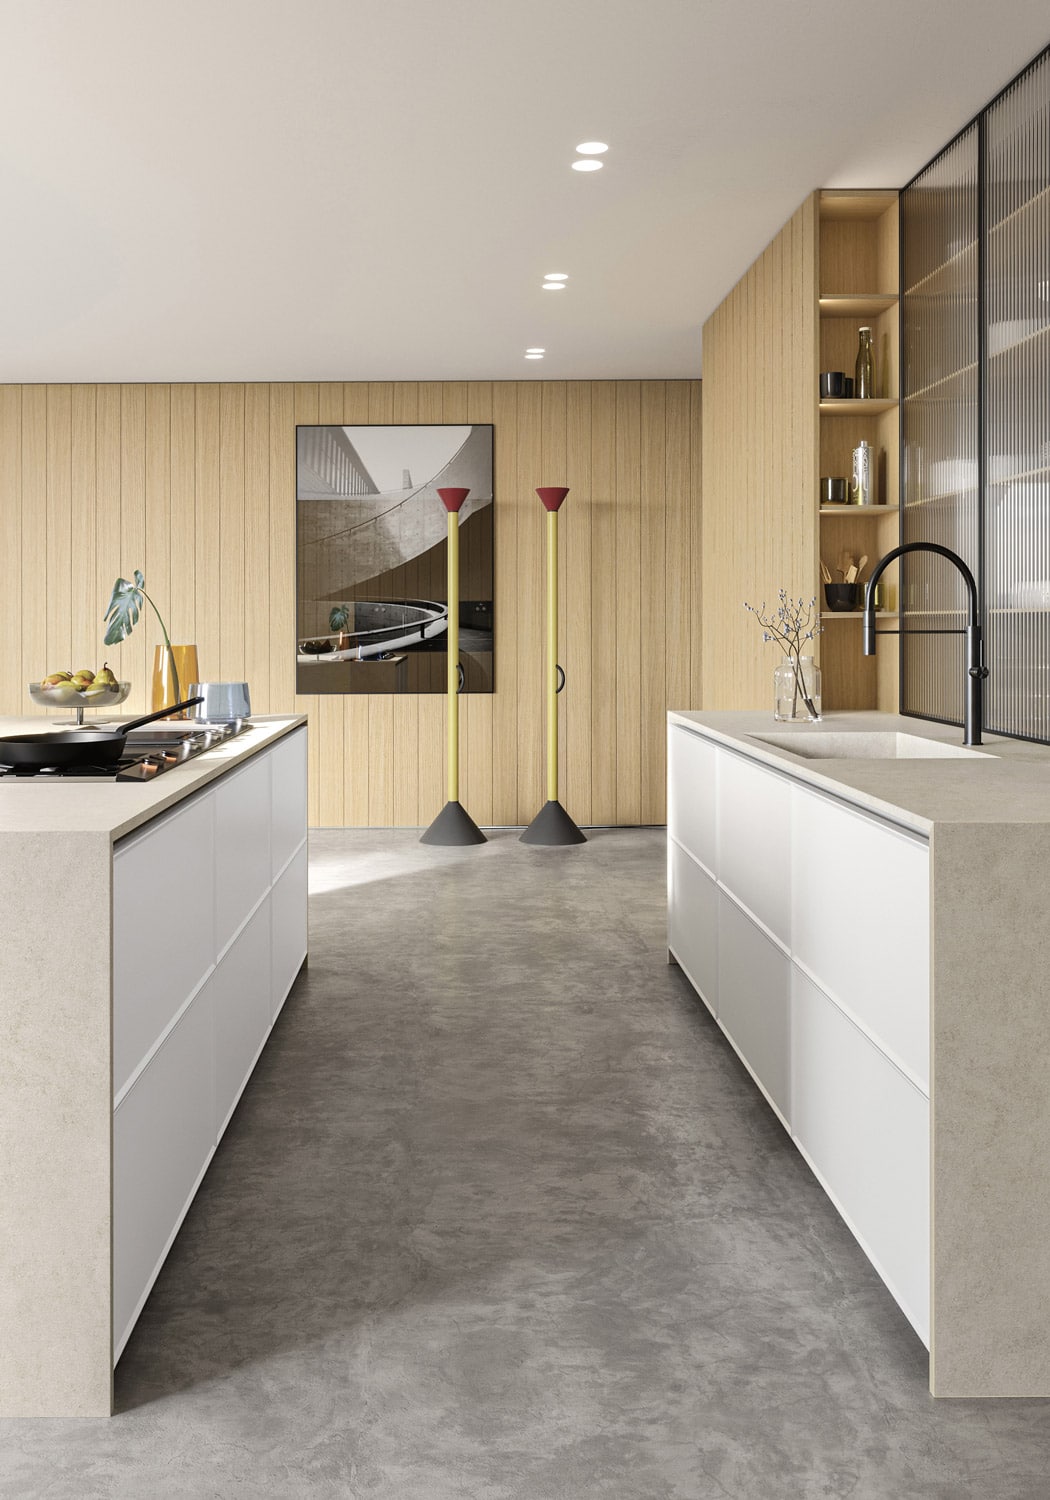 The result is a kitchen design at once minimalistic and rich in custom details. 